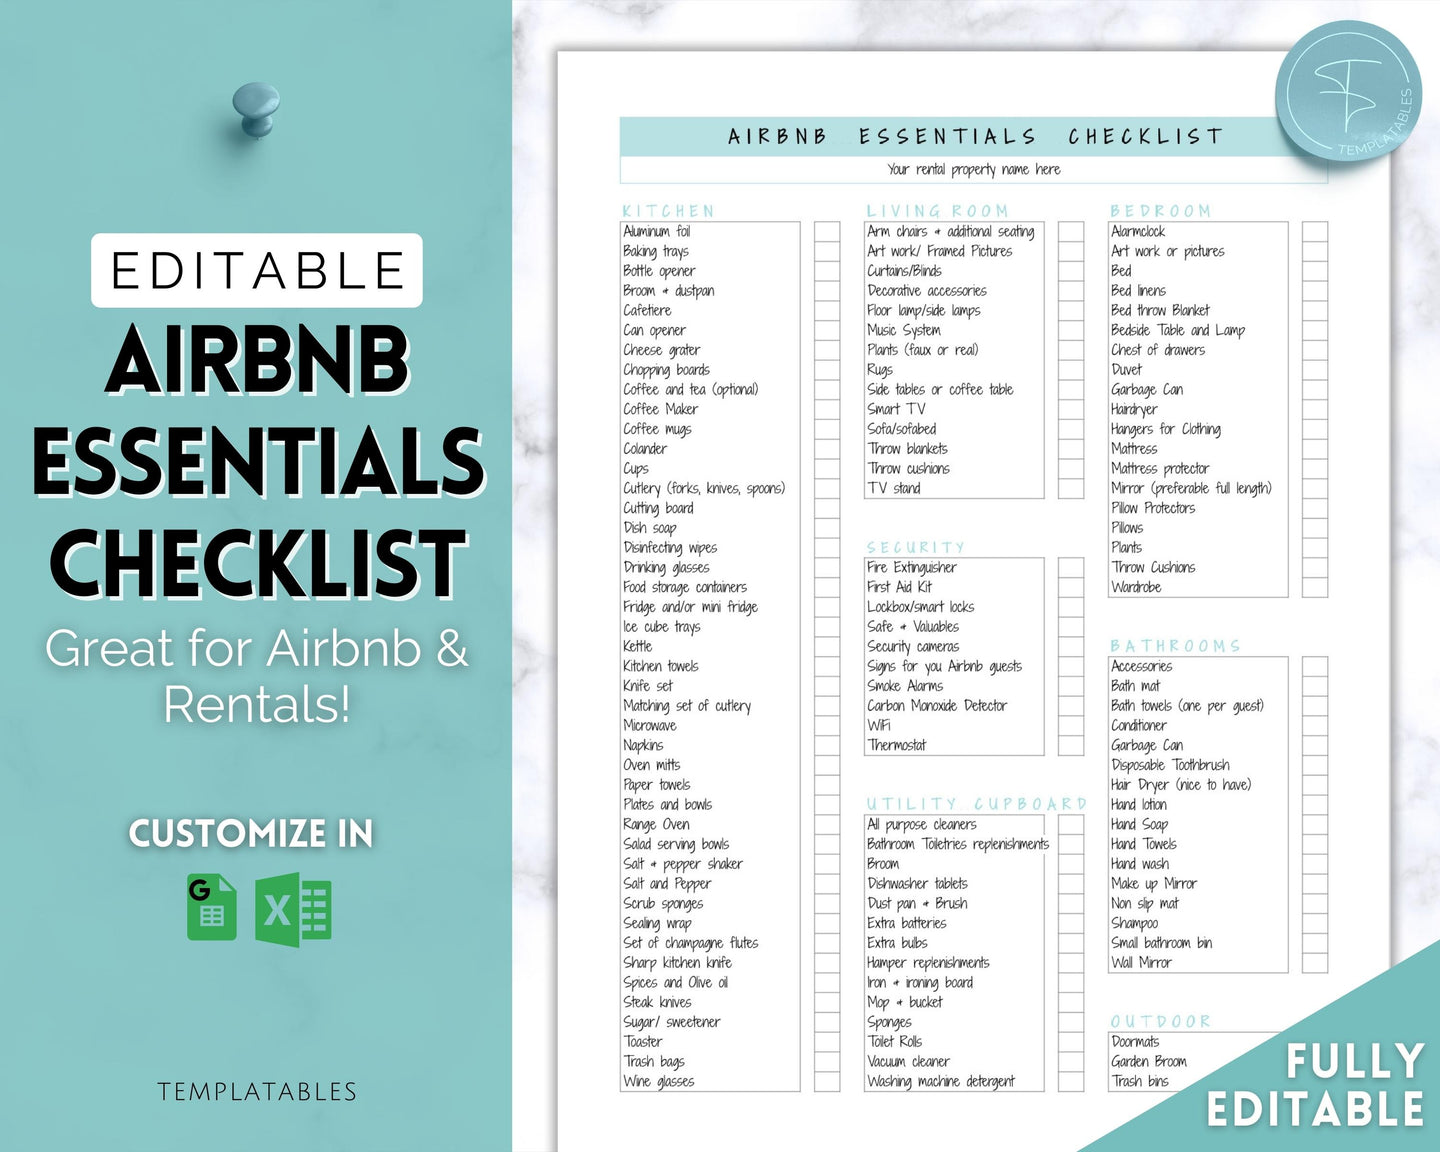 Airbnb Essentials Checklist | EDITABLE Airbnb Inventory List for Airbnb Hosts | Teal